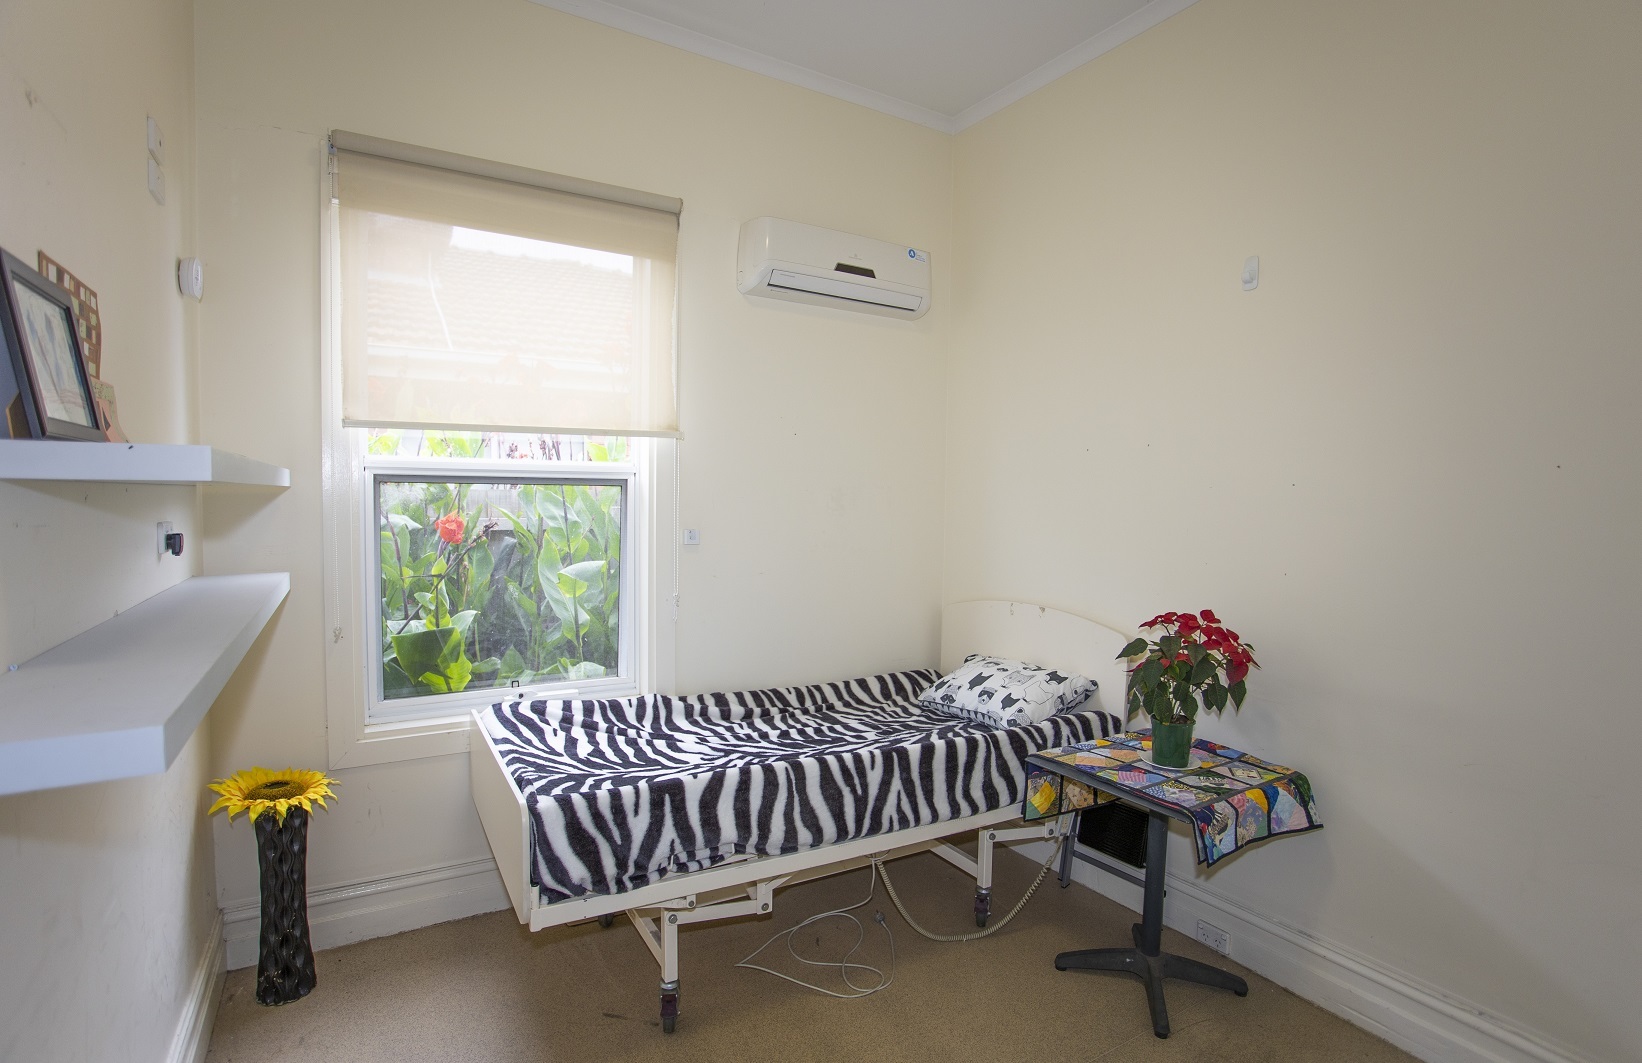 Bedroom with cream wallpaper in SDA home in Thornbury